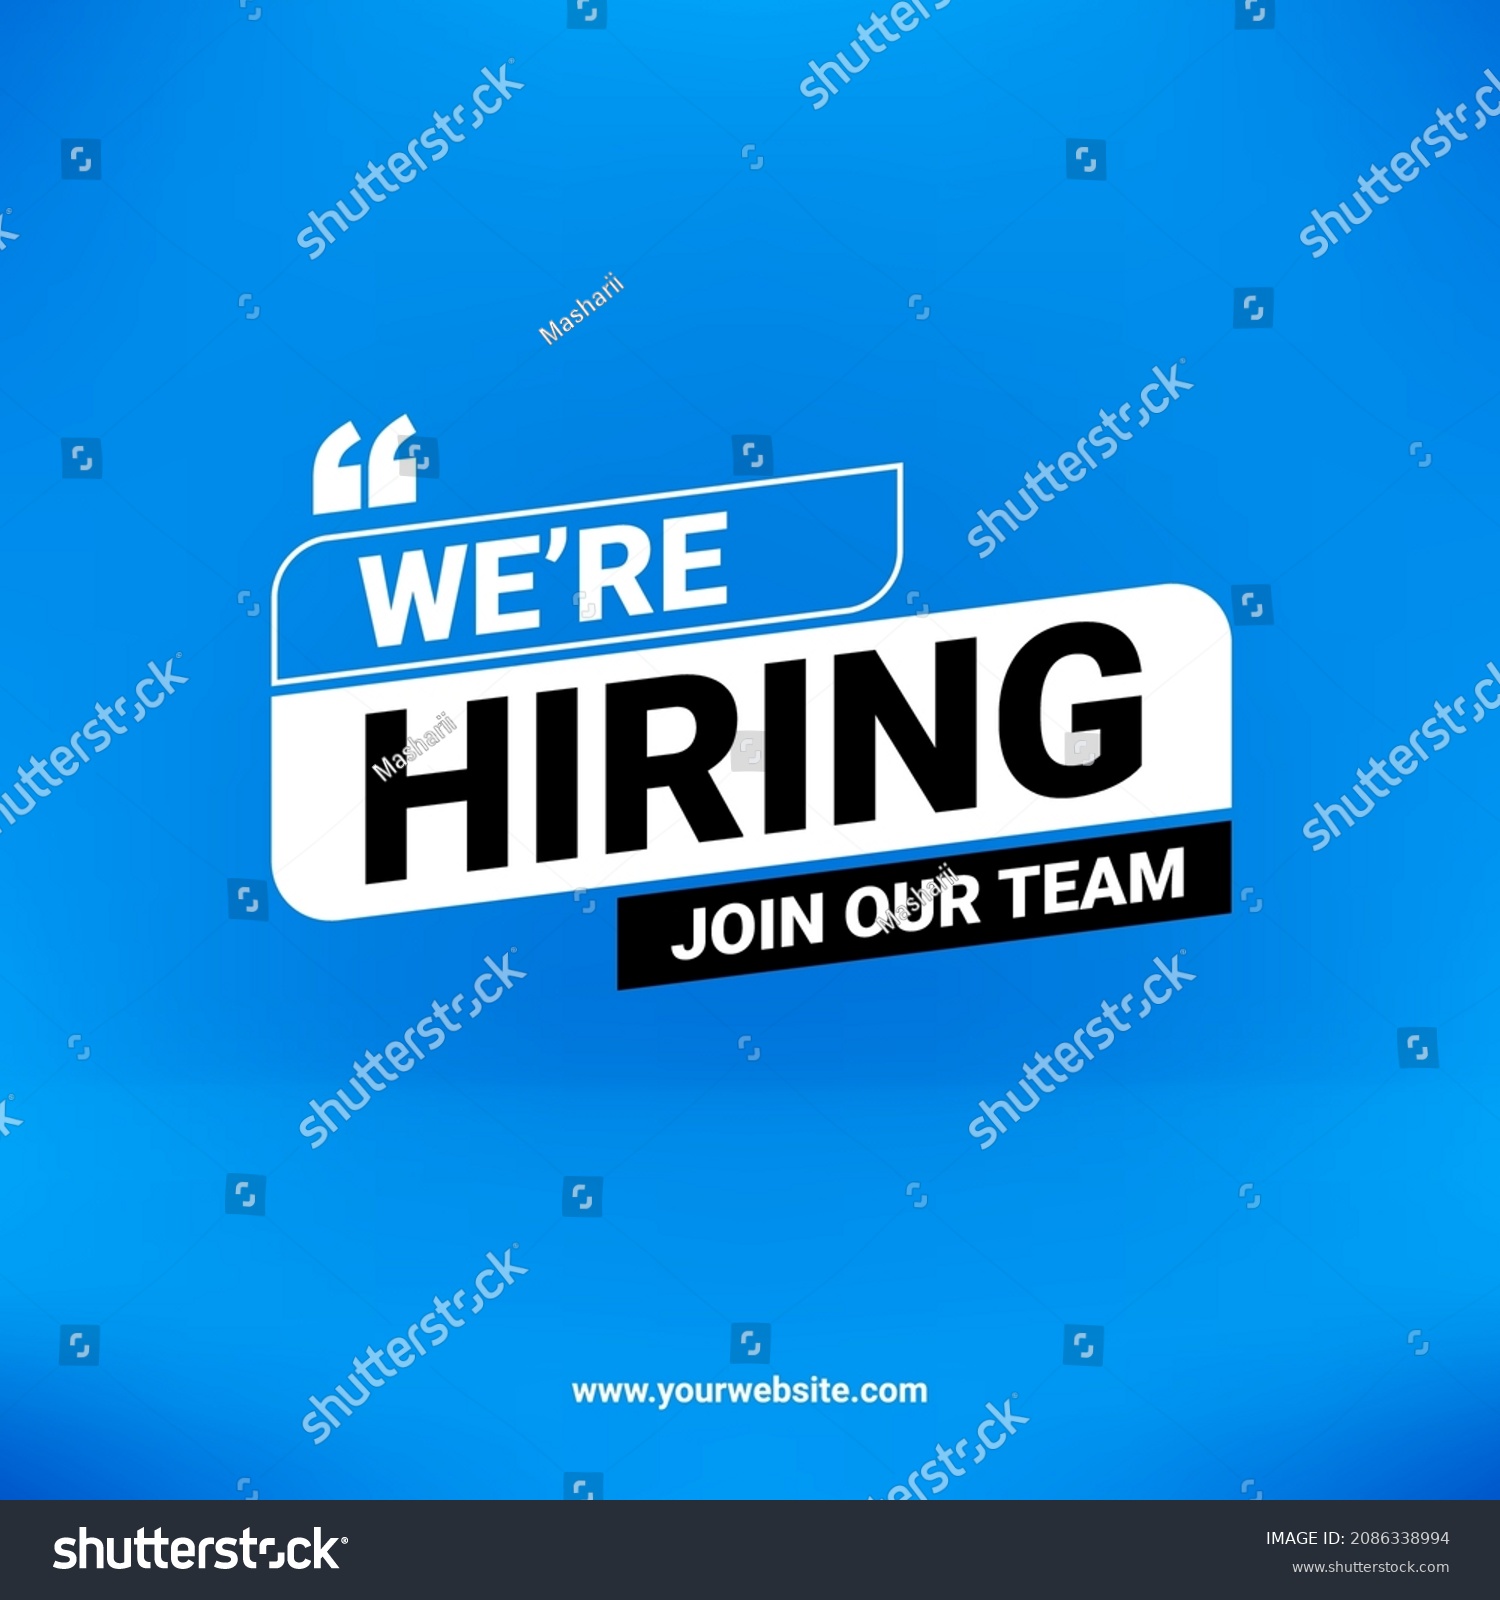 We're Hiring Banner Template. Business Recruiting Concept. Open Vacancy Design Template with Blue Colour - EPS 10 Vector #2086338994